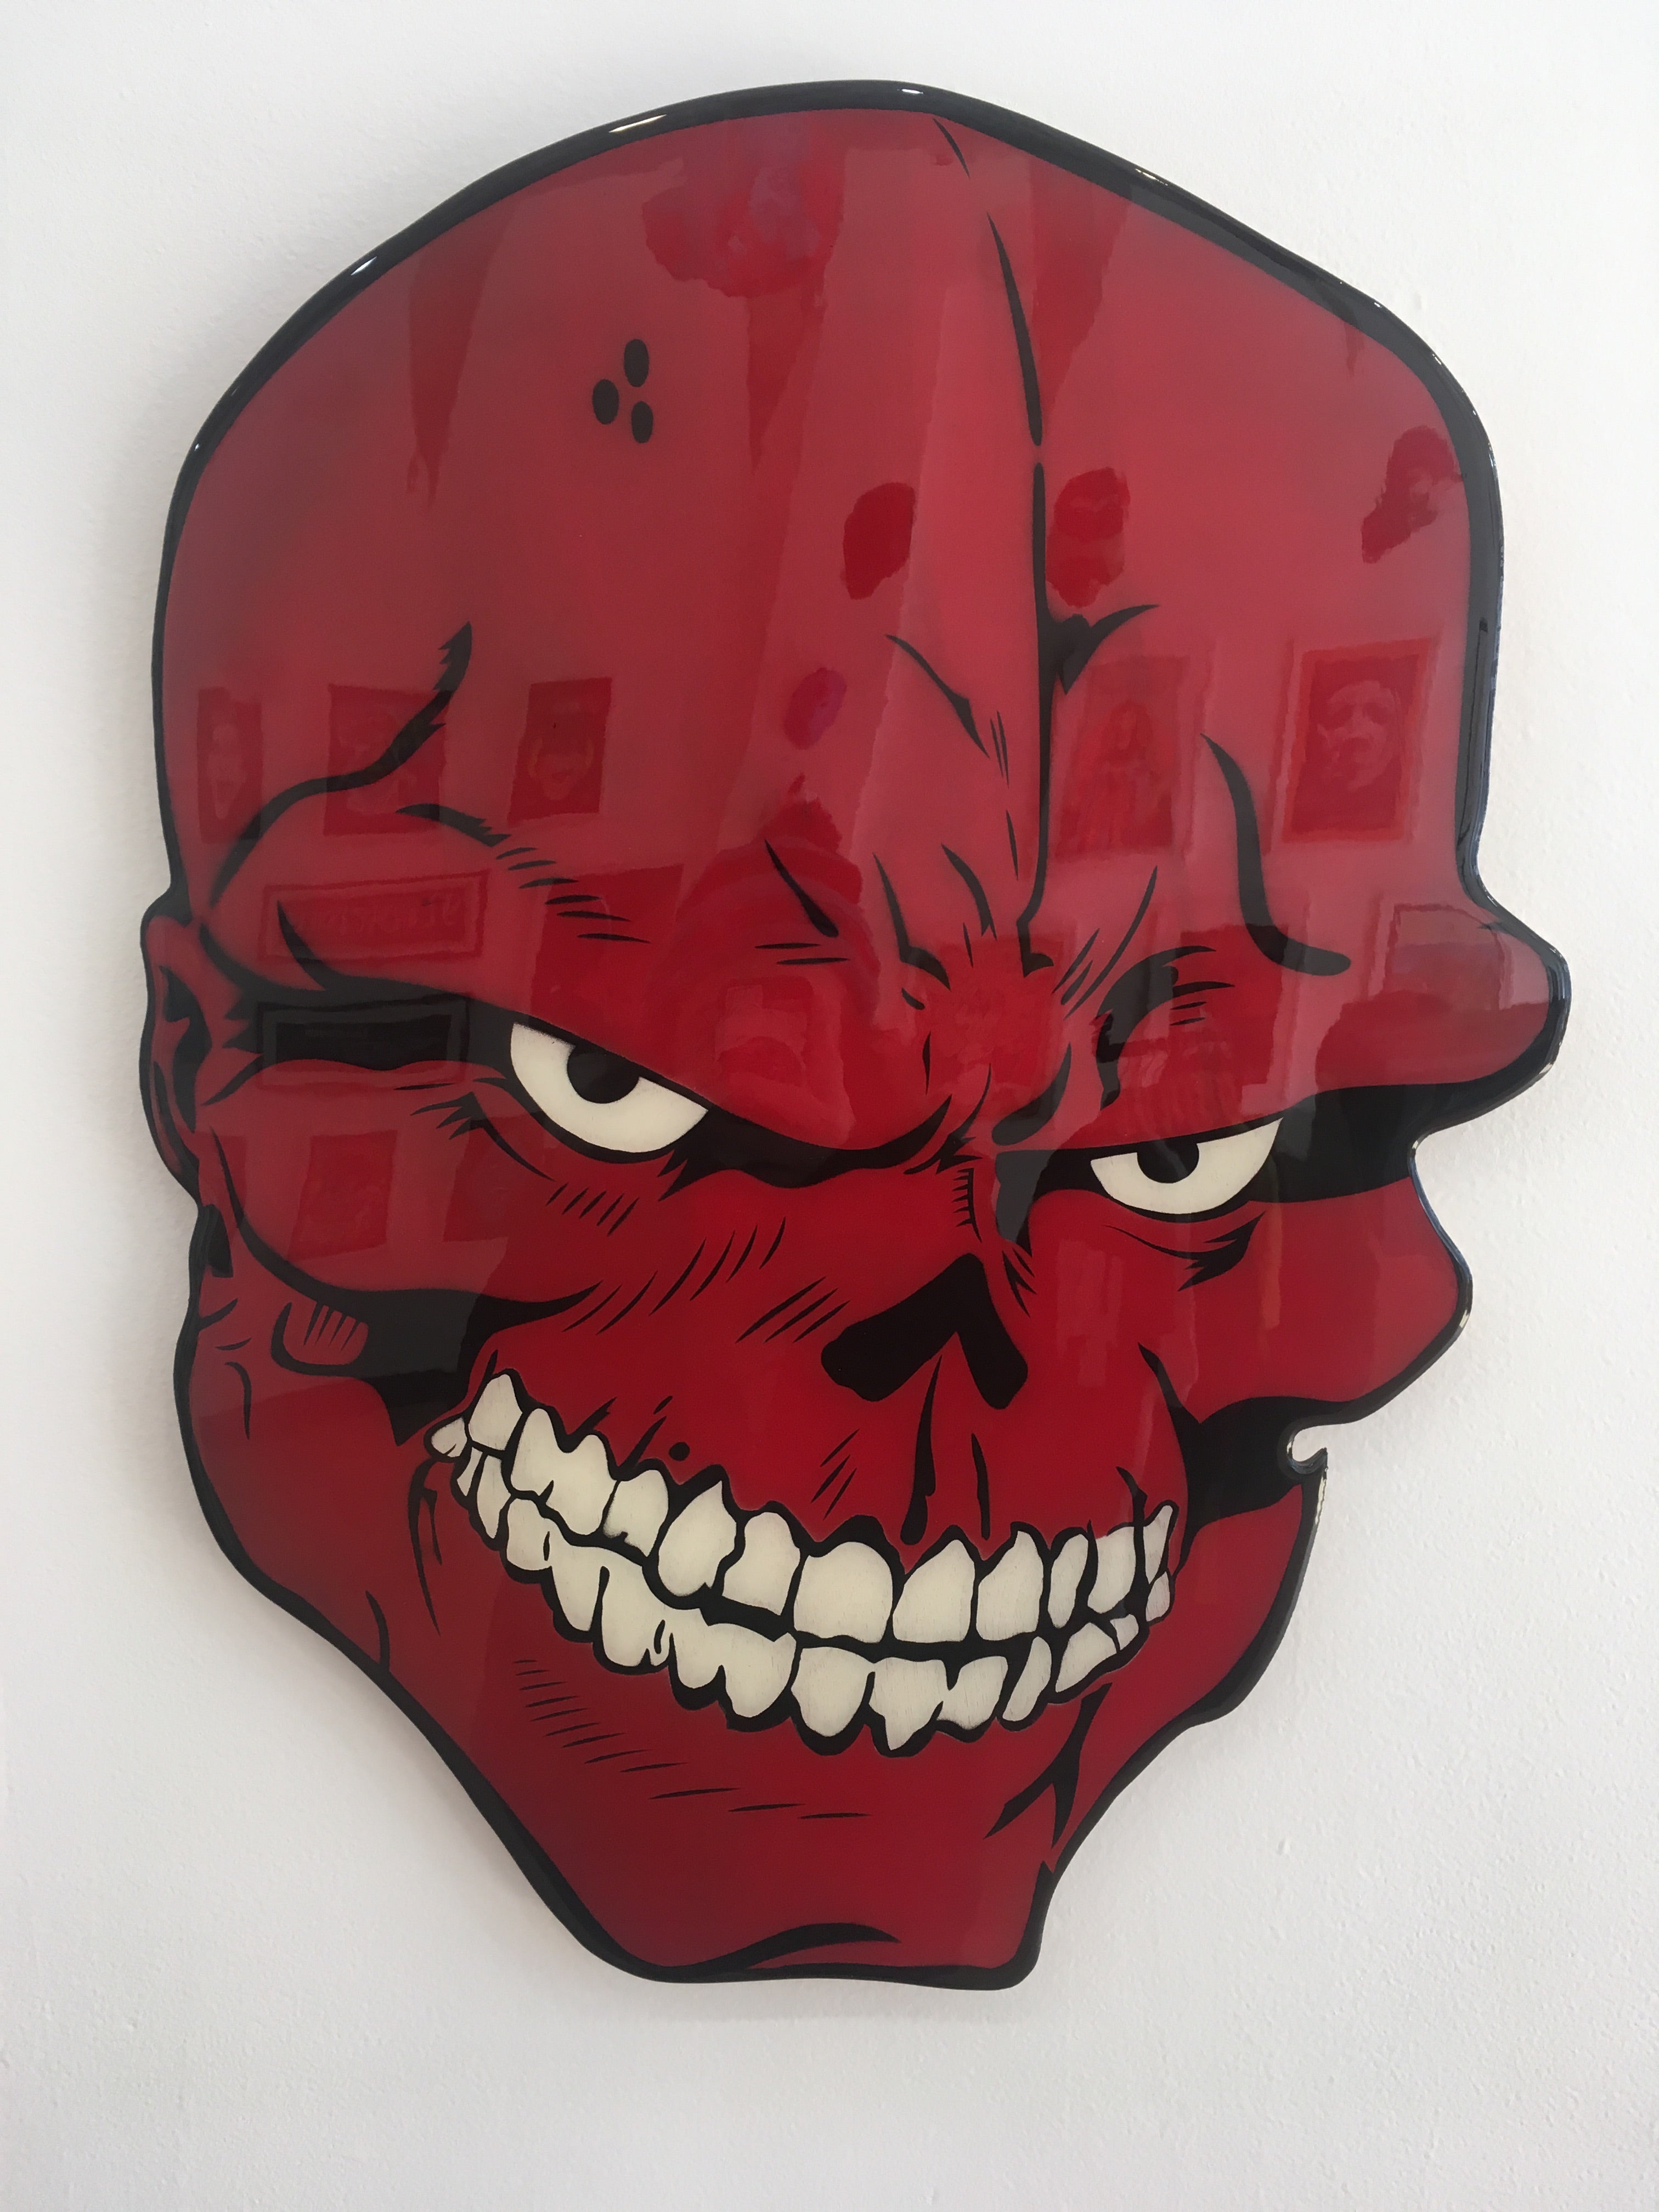 "The Red Skull" by R6D4